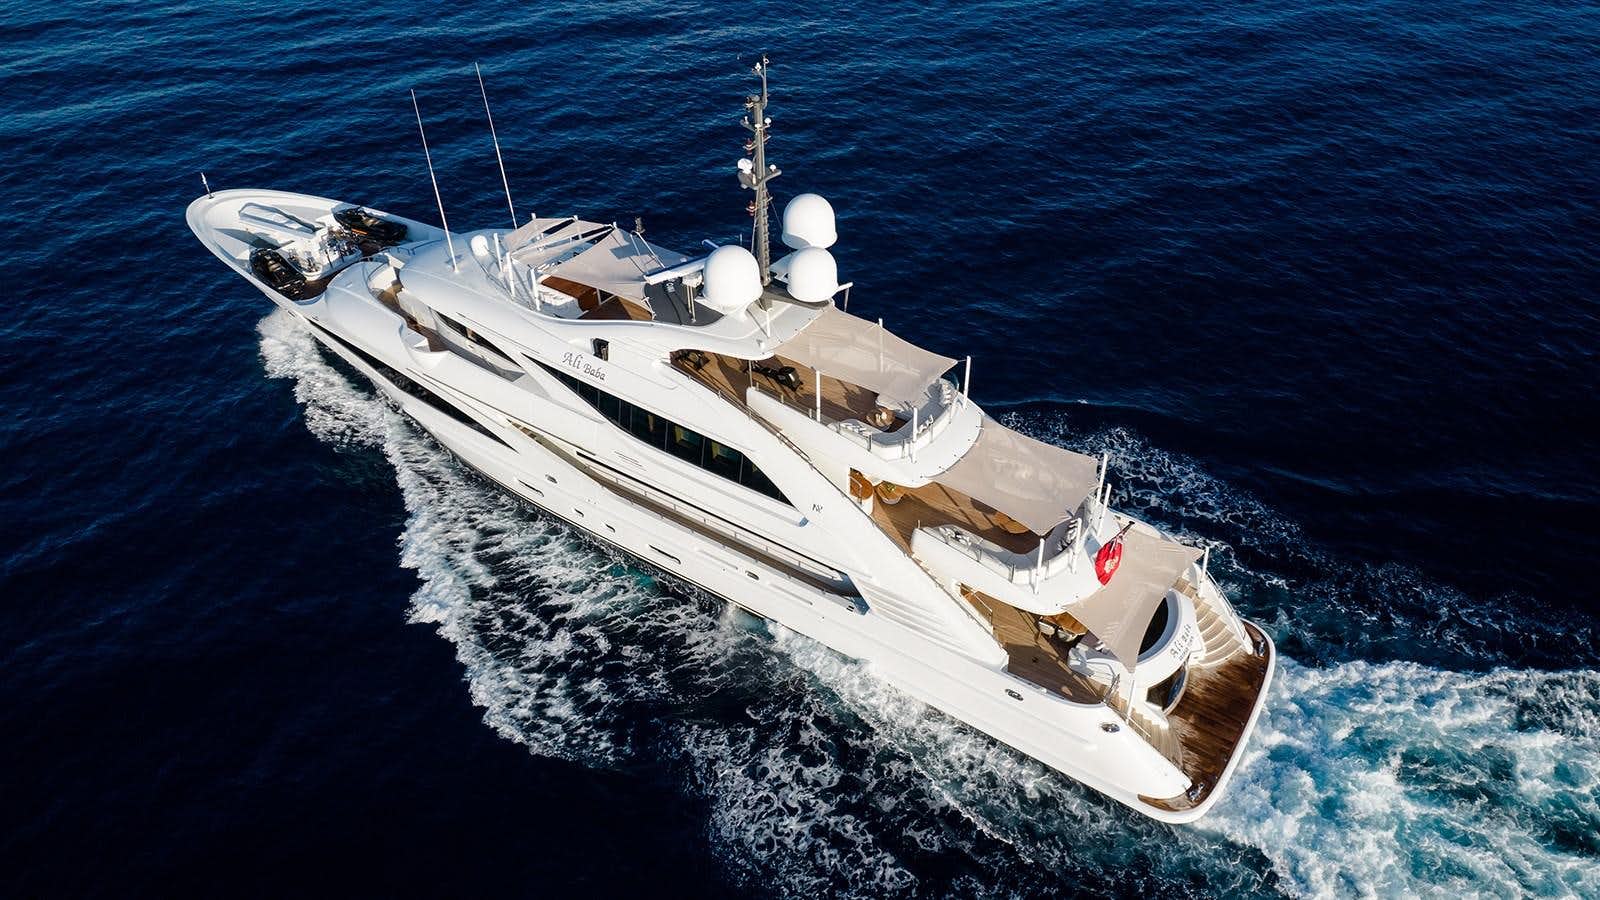 Ali baba
Yacht for Sale